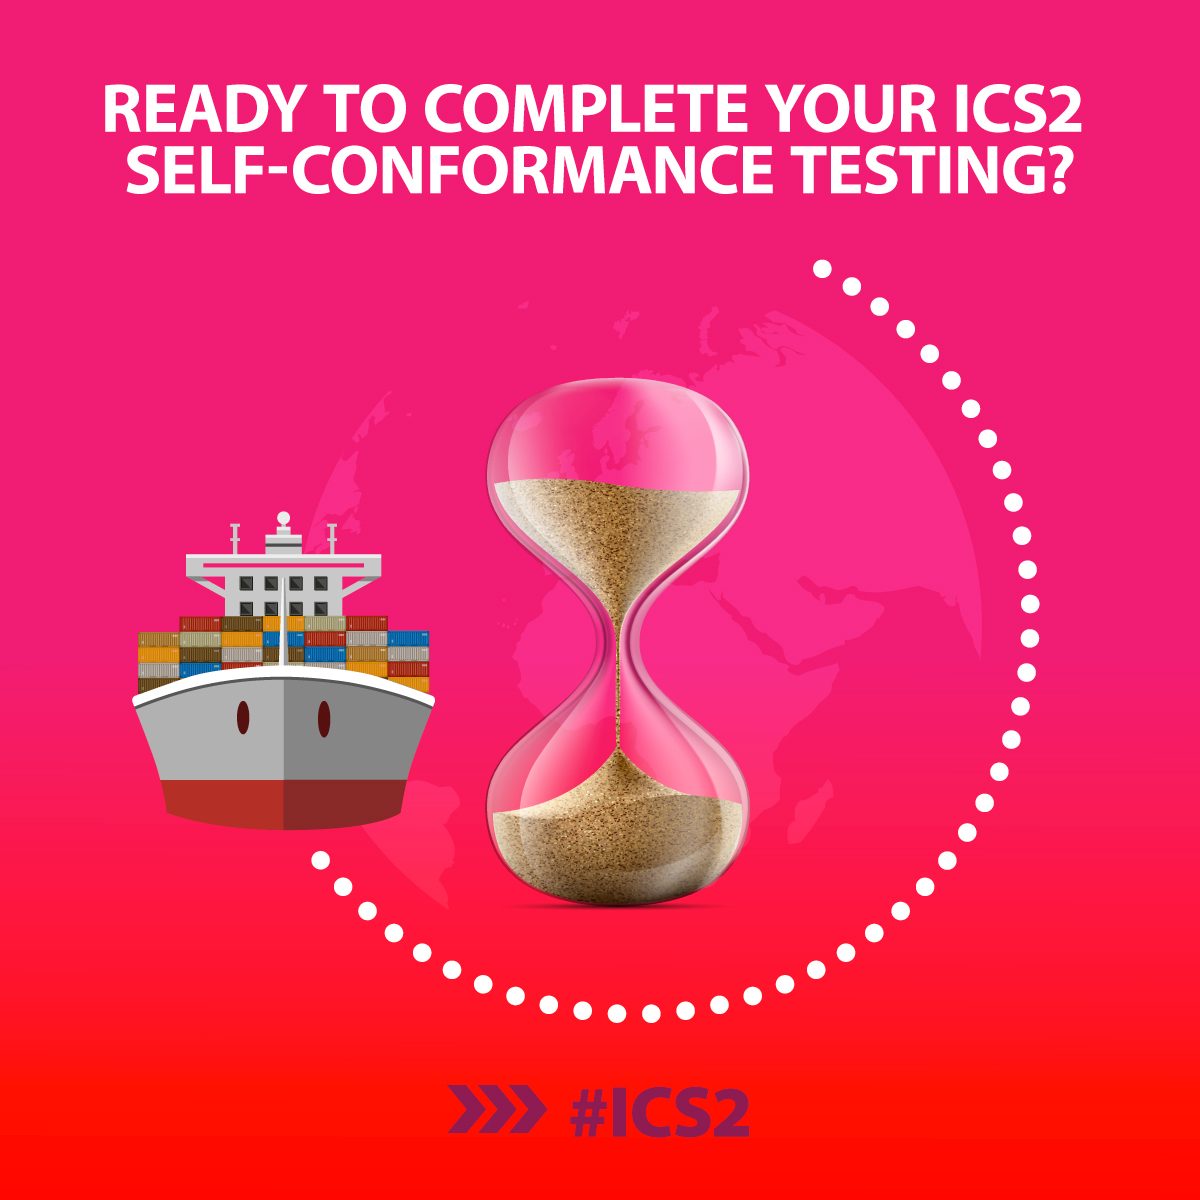 ⏳ Maritime & inland waterway carriers, the clock is ticking! 📅 From 3 June 2024, ensure your systems are ready to meet the EU's new customs requirements. 🚢Before connecting to #ICS2, completing self-conformance testing is a must. Learn more 👉 europa.eu/!yfKhnF